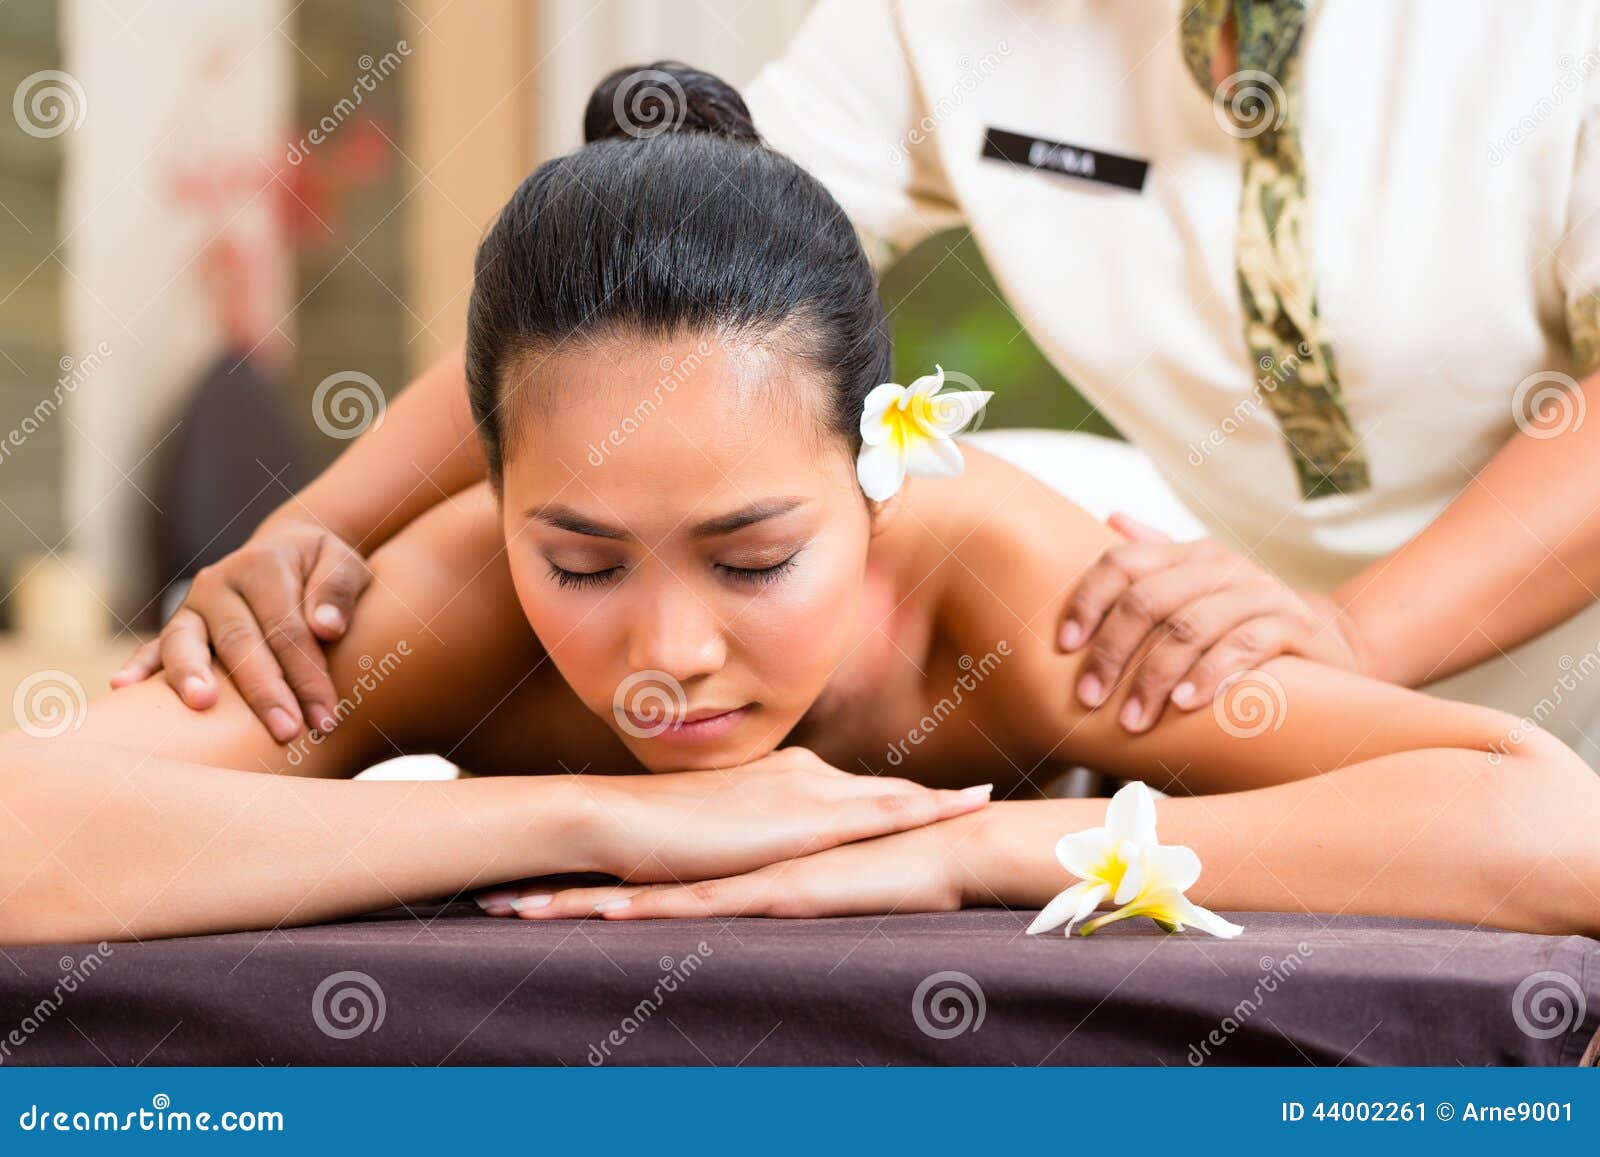 Indonesian Woman Wellness Massage In Spa Stock Image I